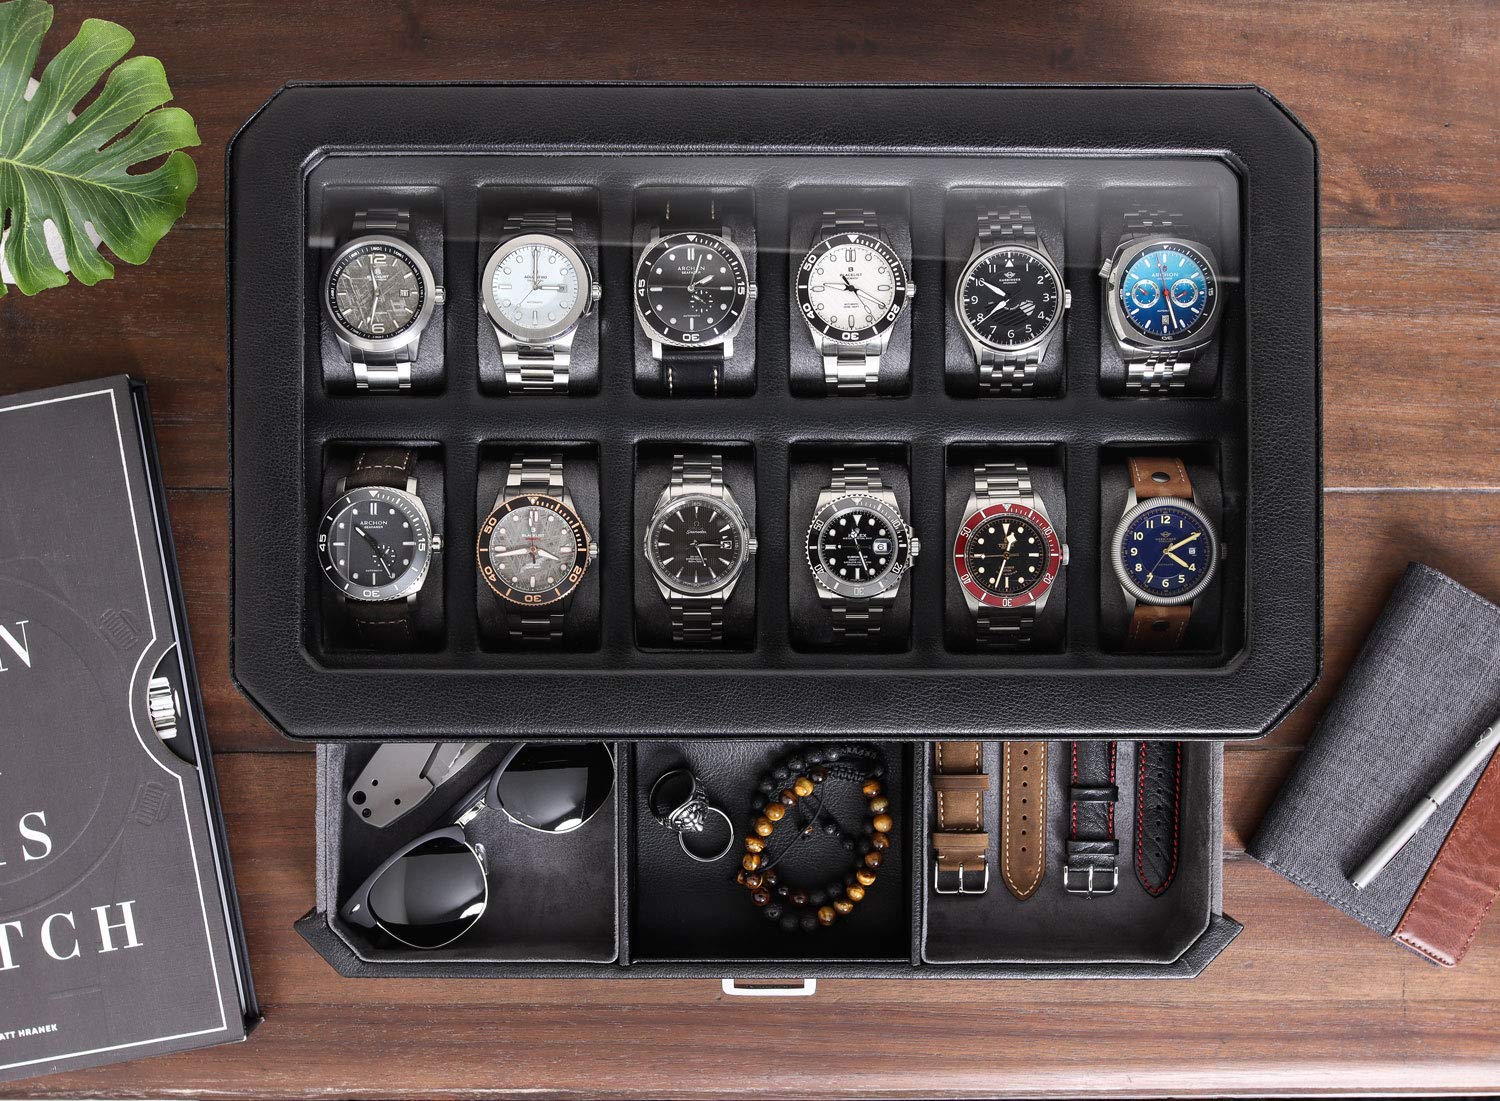 ROTHWELL 12 Slot Leather Watch Box with Valet Drawer - Luxury Watch and Jewelry Case Display Organizer, Microsuede liner, Mens Locking Watch Storage Holder Large Glass Top (Black/Grey)